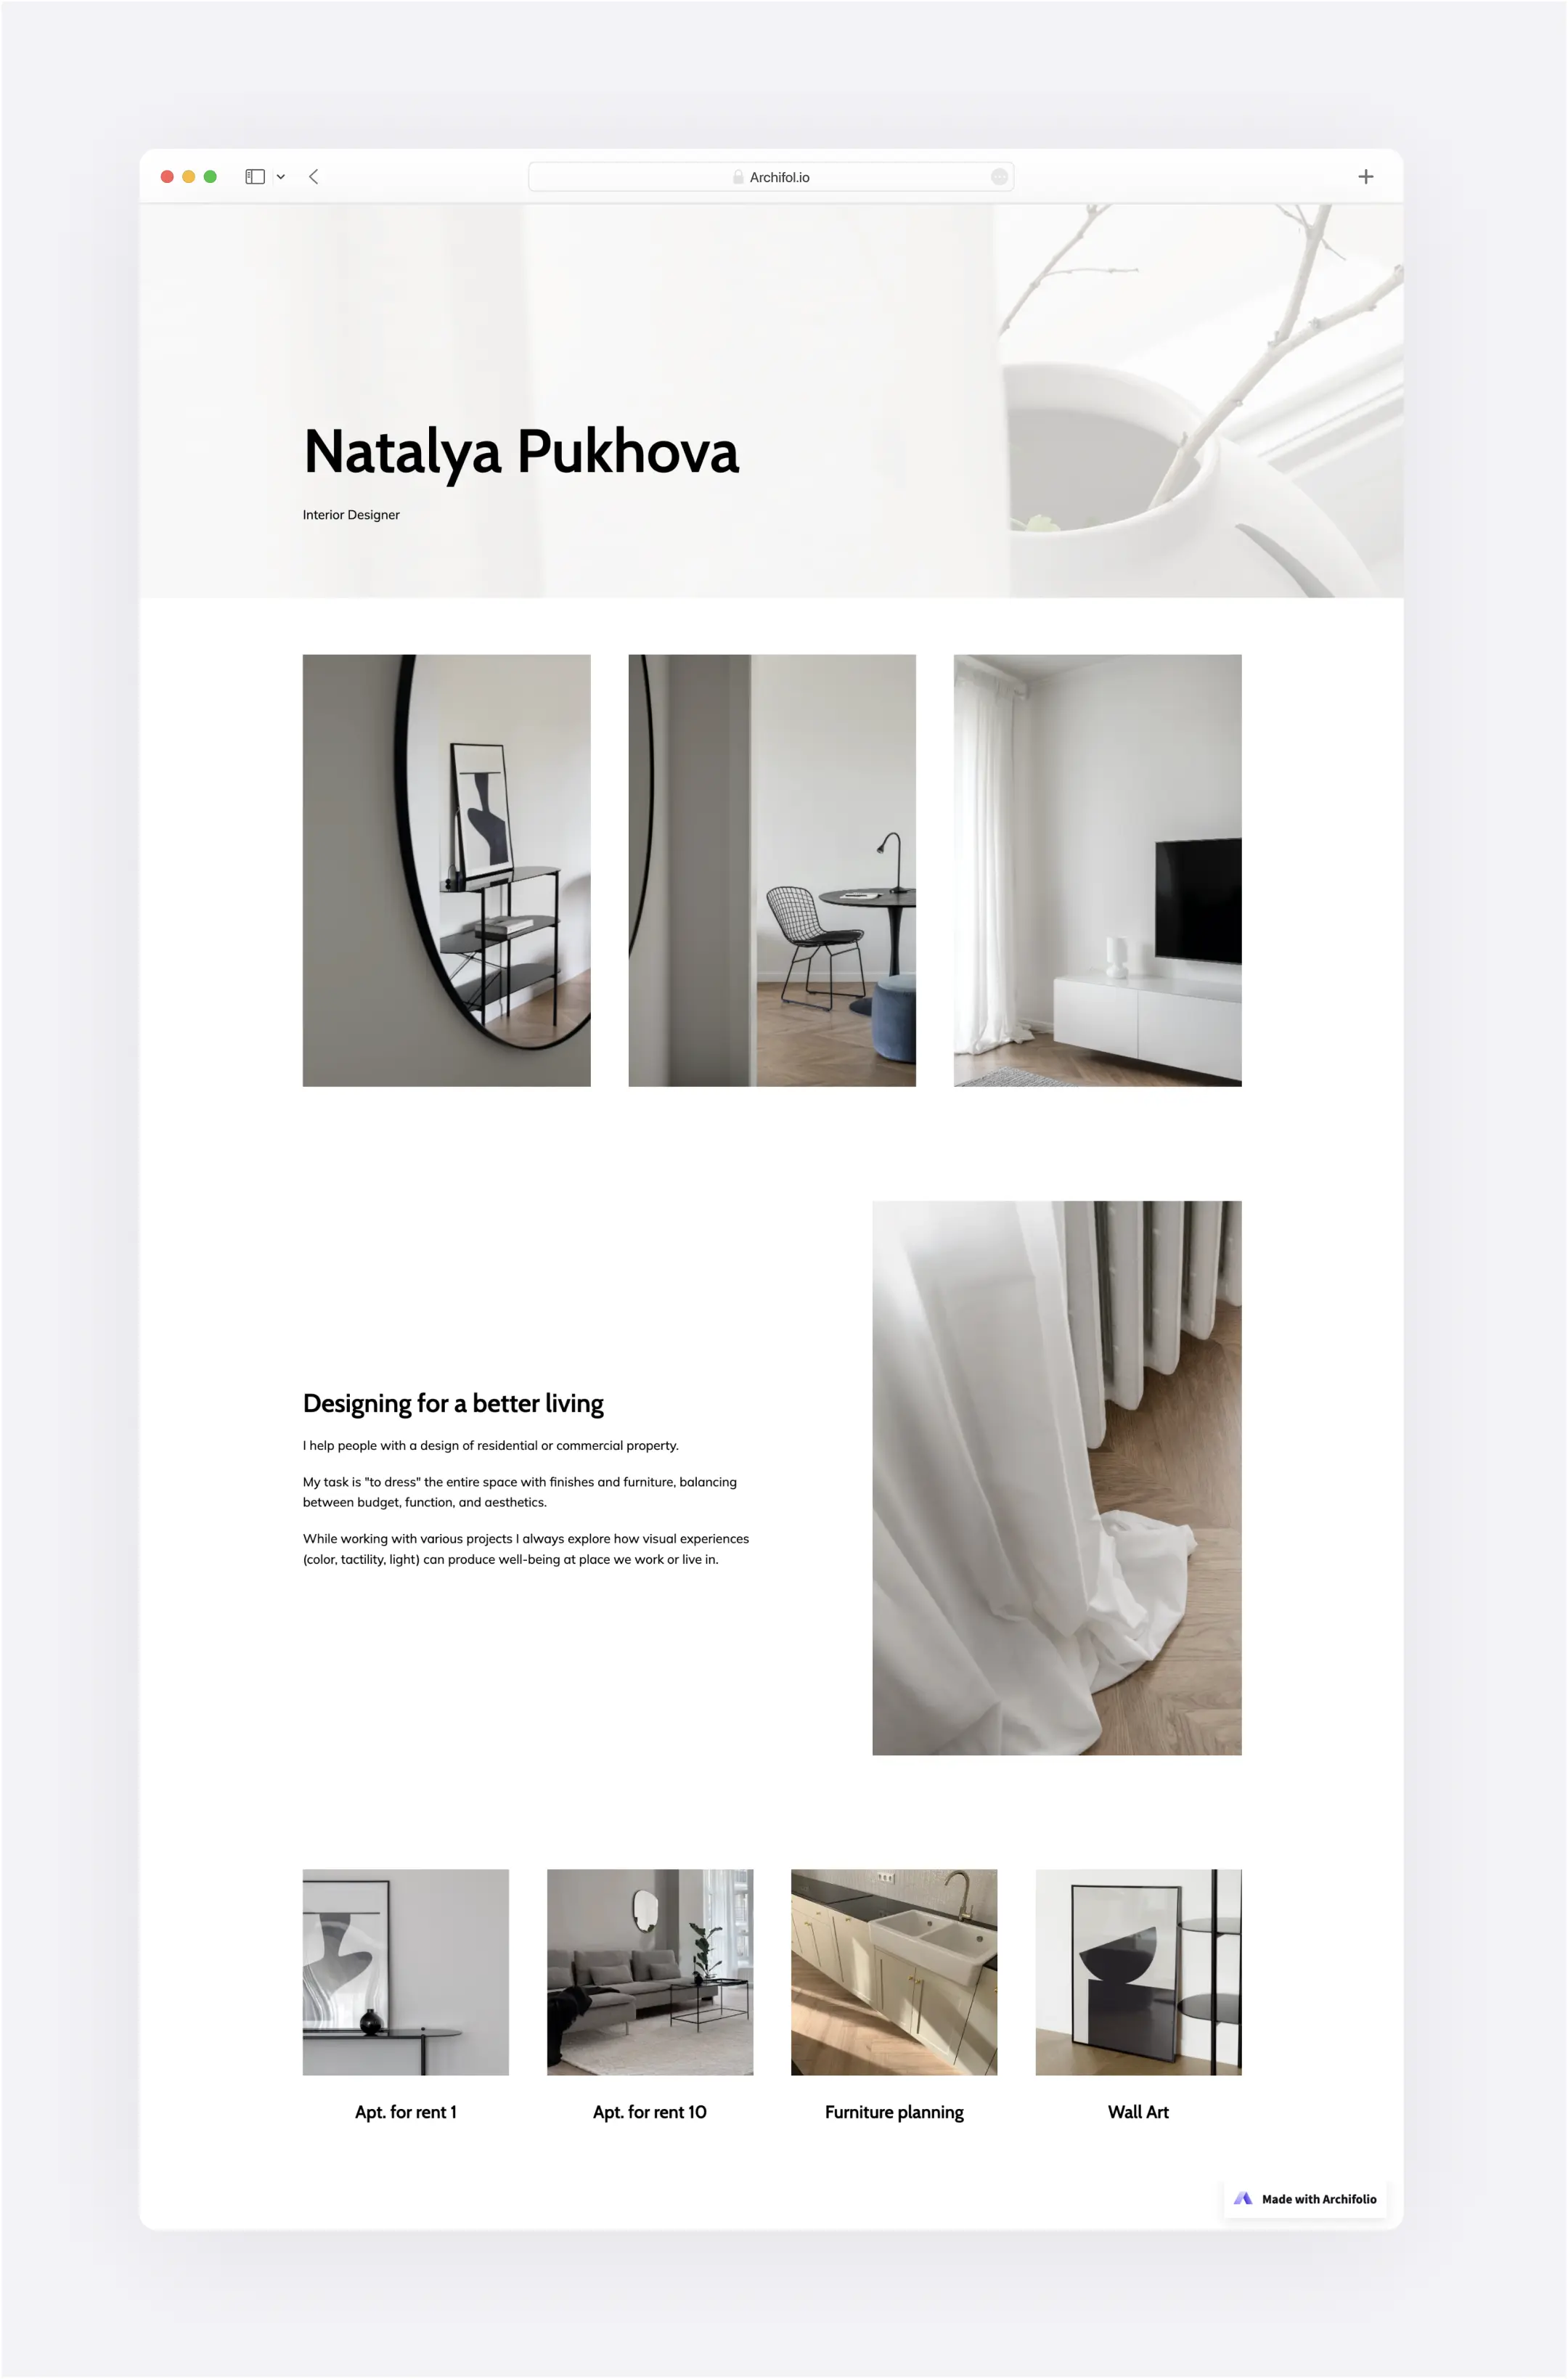 A screenshot of a website with white background professional images of interior design deatails